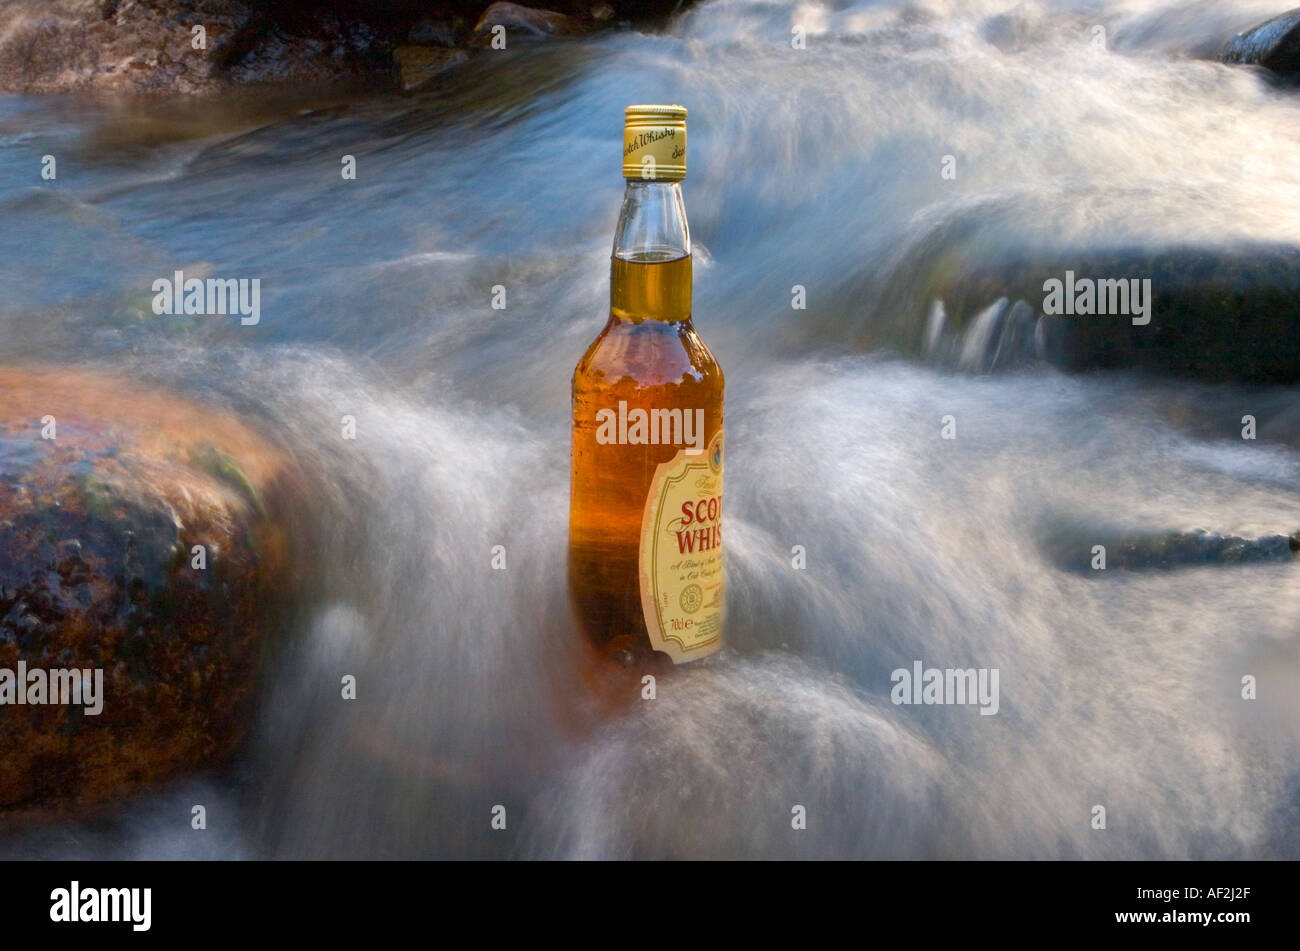 Scotch whisky bottle in ice cold water from the Cairngorms in burn near Braemar, Cairngorm National Park, Scotland, UK Stock Photo